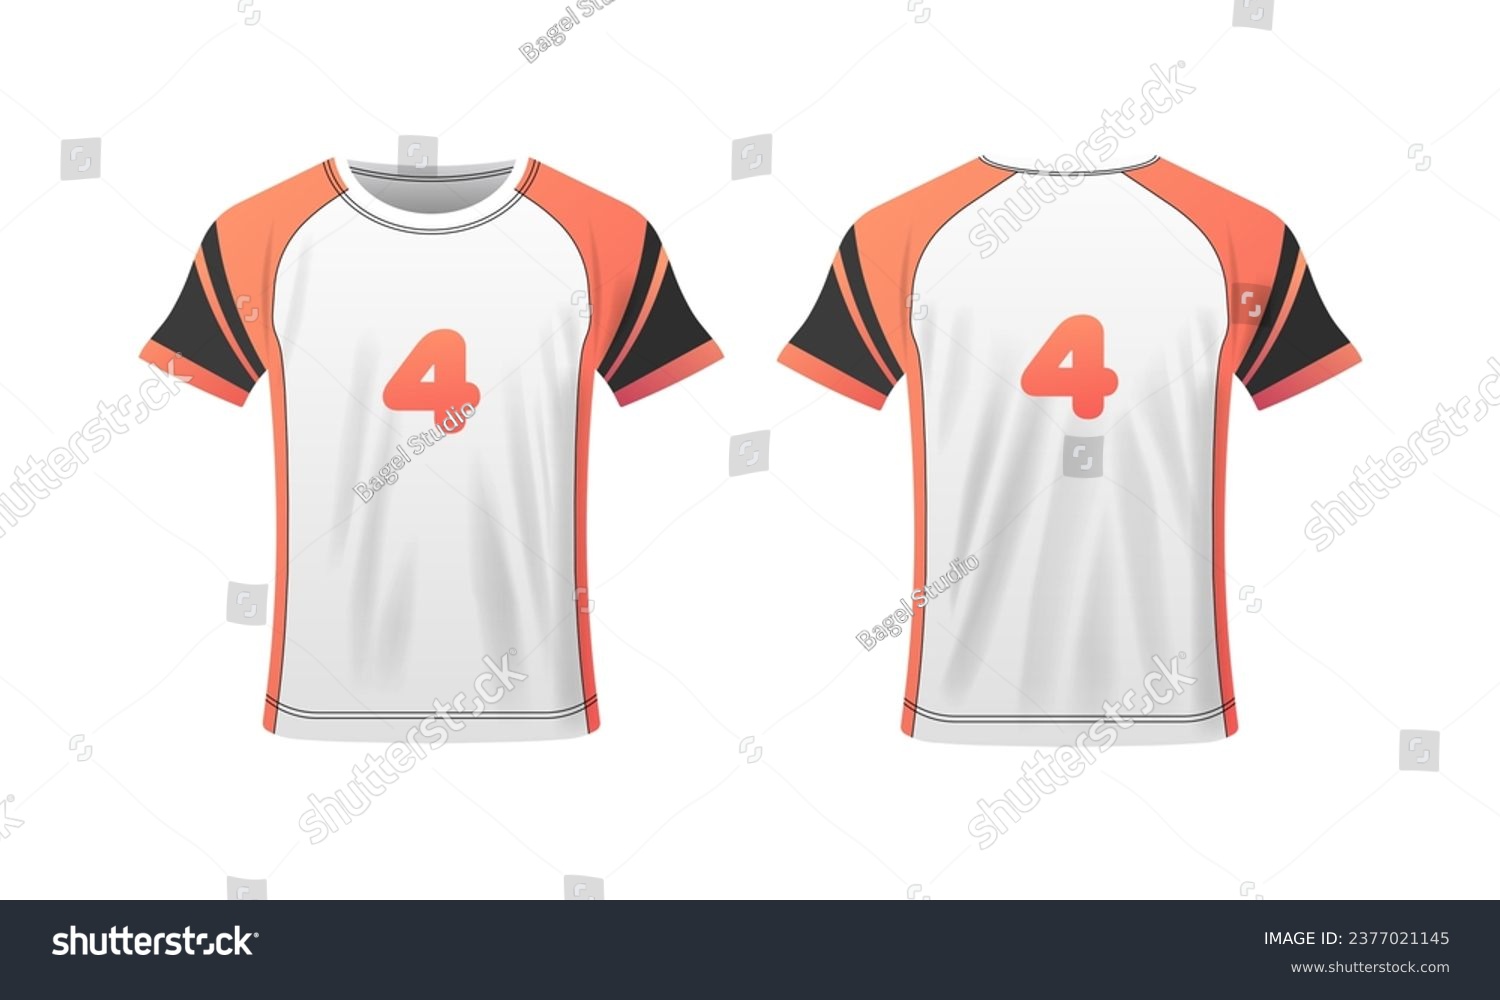 SVG of T-shirt mockup. Flat, color, number 4, T-shirt layout, T-shirt mockup with numbers. Vector icons svg